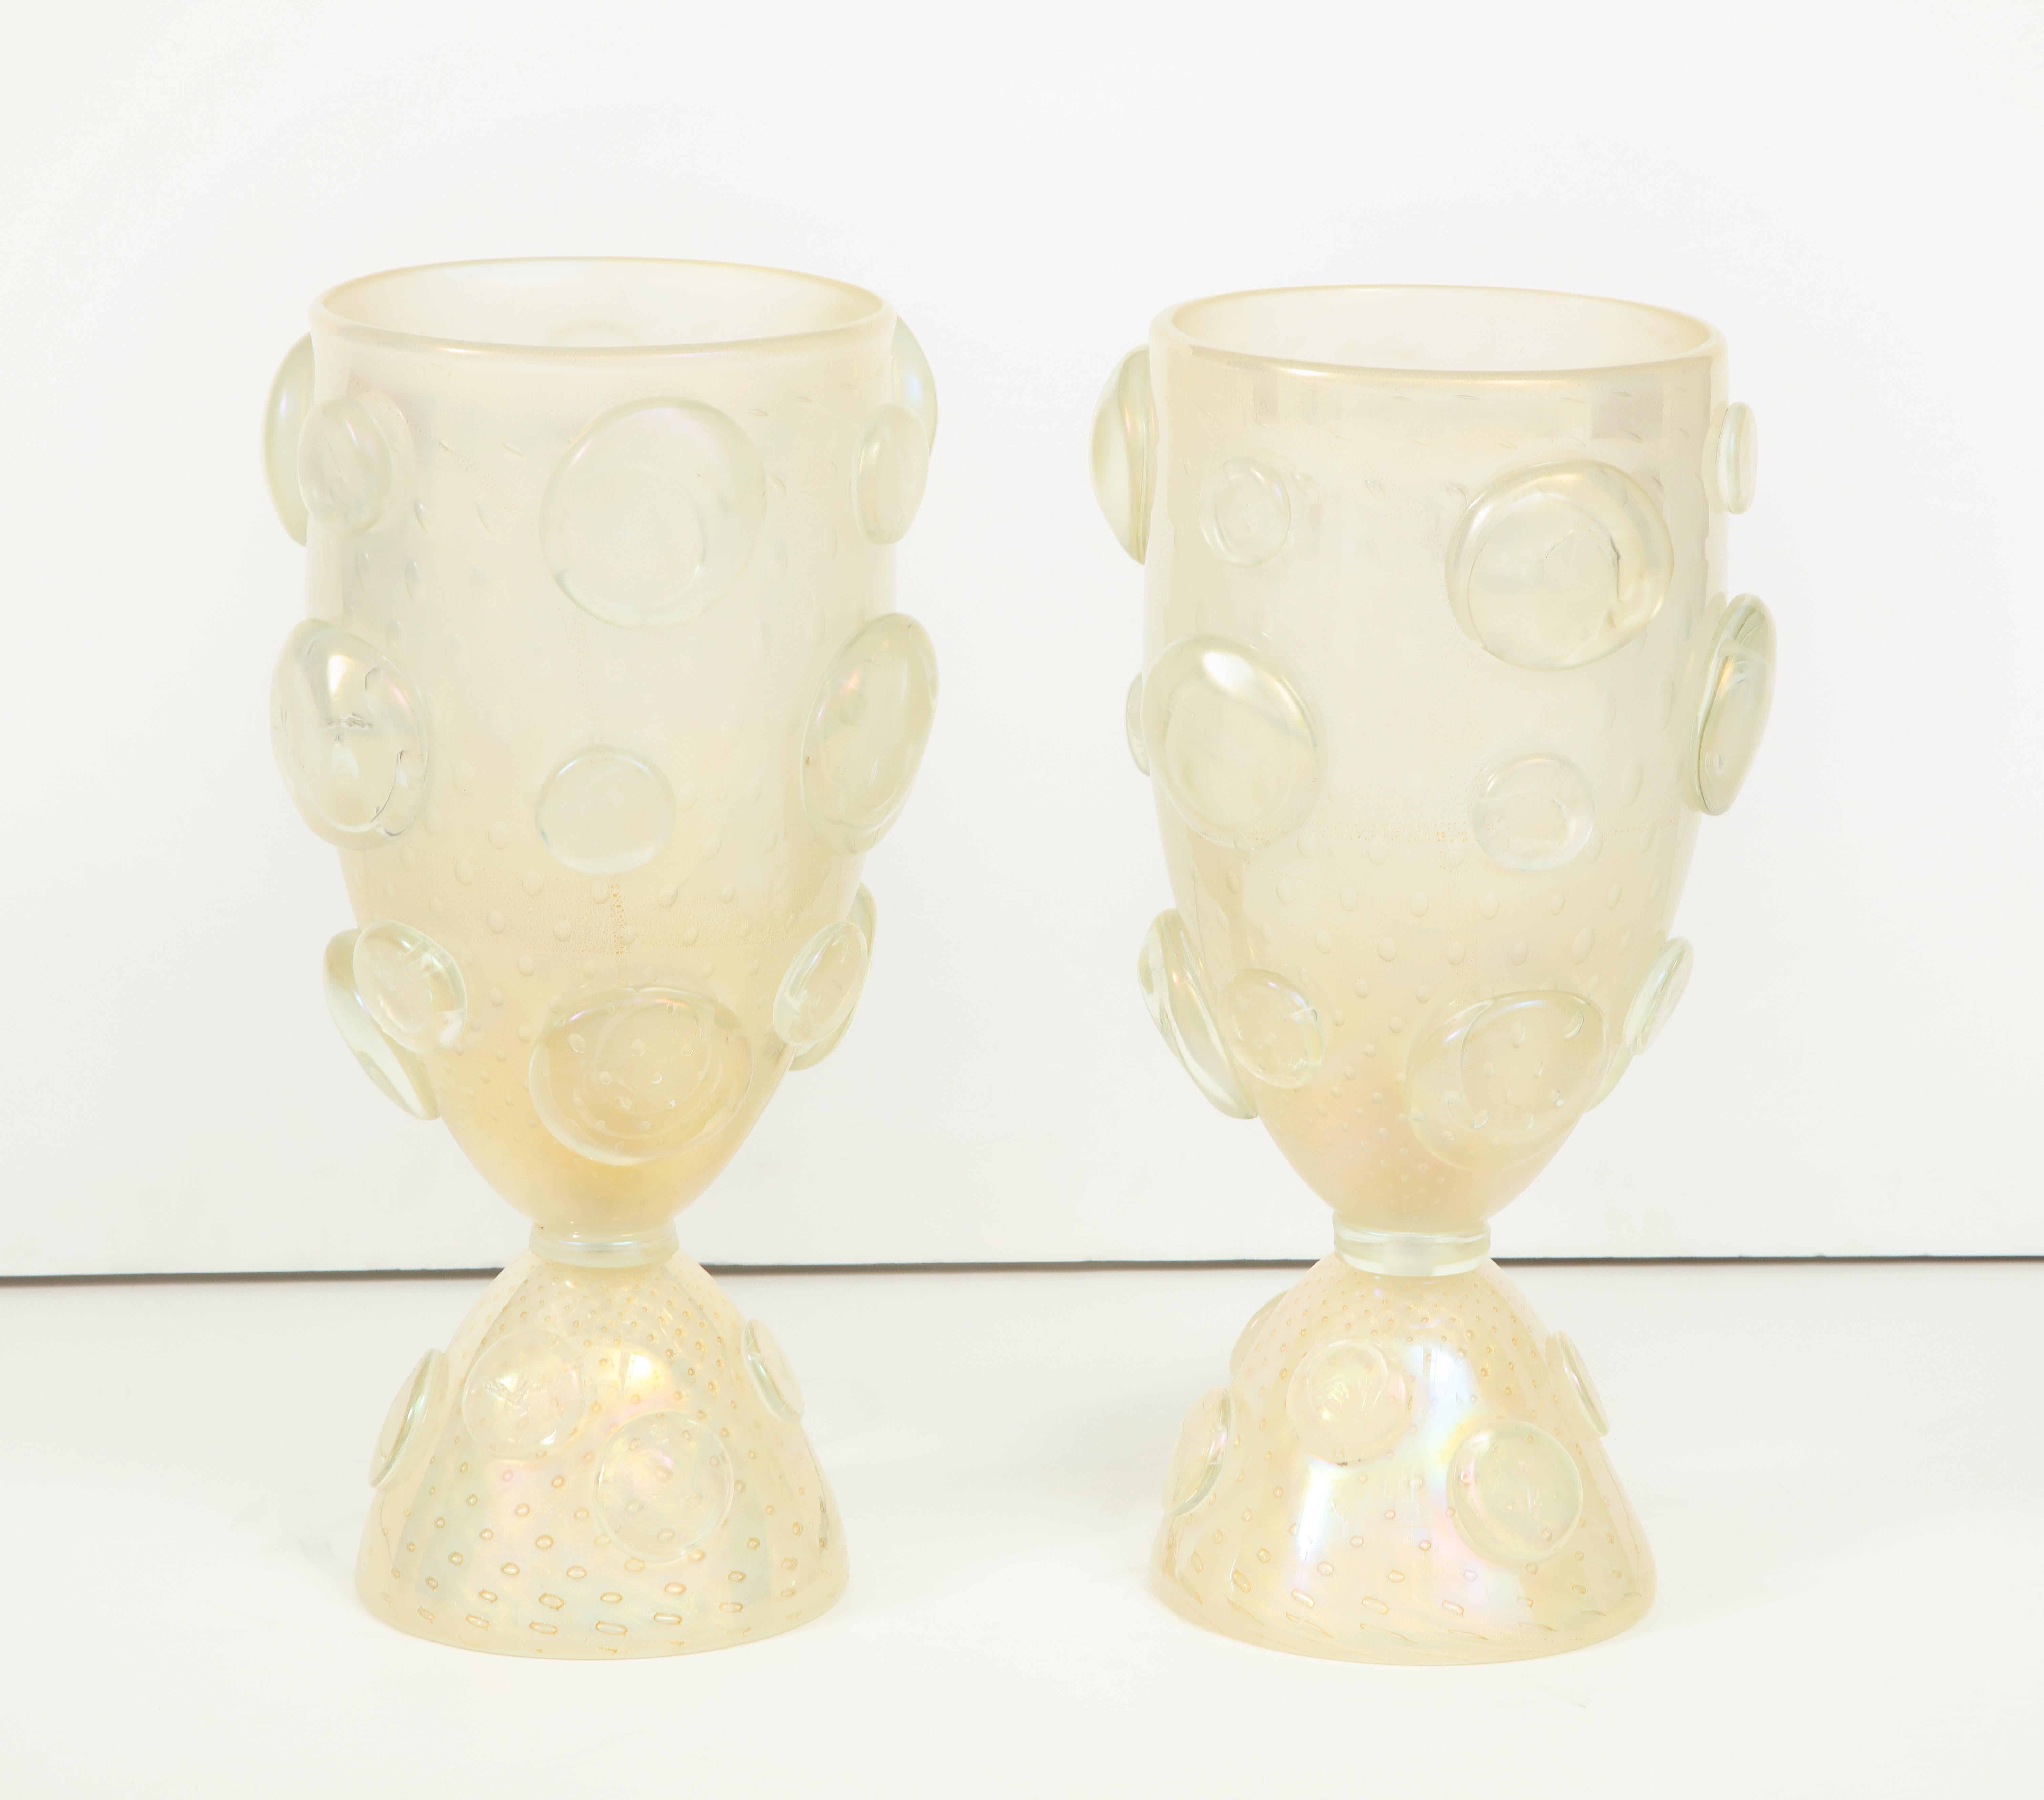 This pair of large vase or urn lamps consist of handblown 